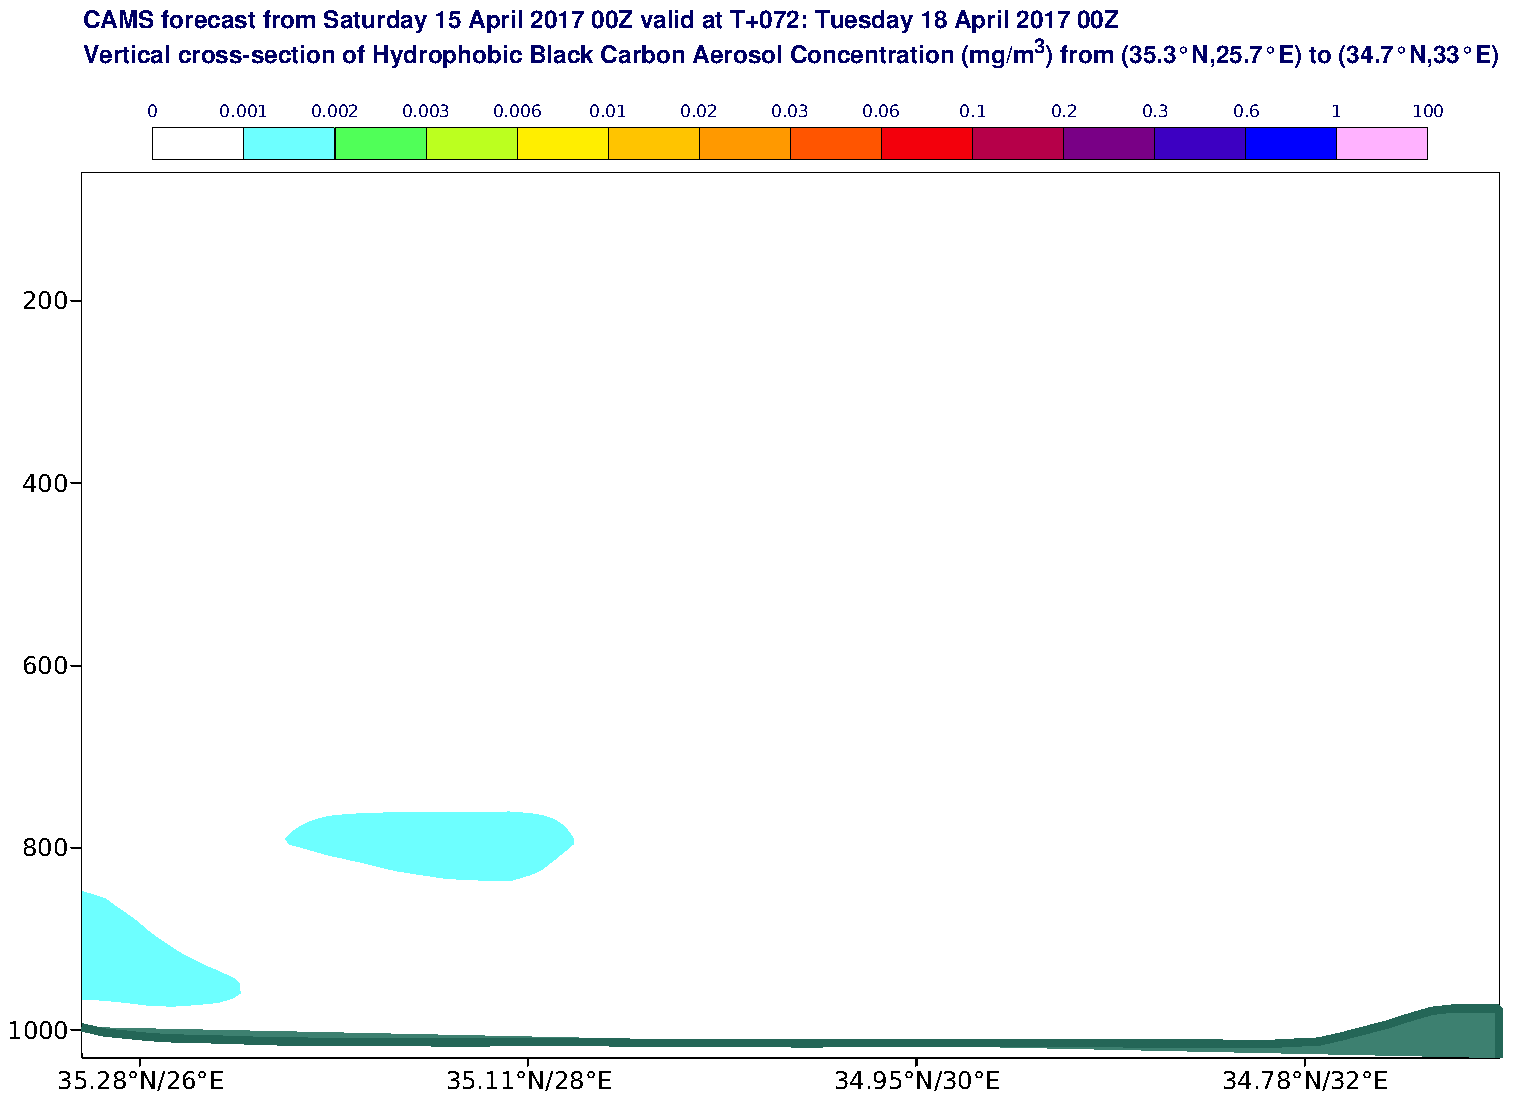 Vertical cross-section of Hydrophobic Black Carbon Aerosol Concentration (mg/m3) valid at T72 - 2017-04-18 00:00